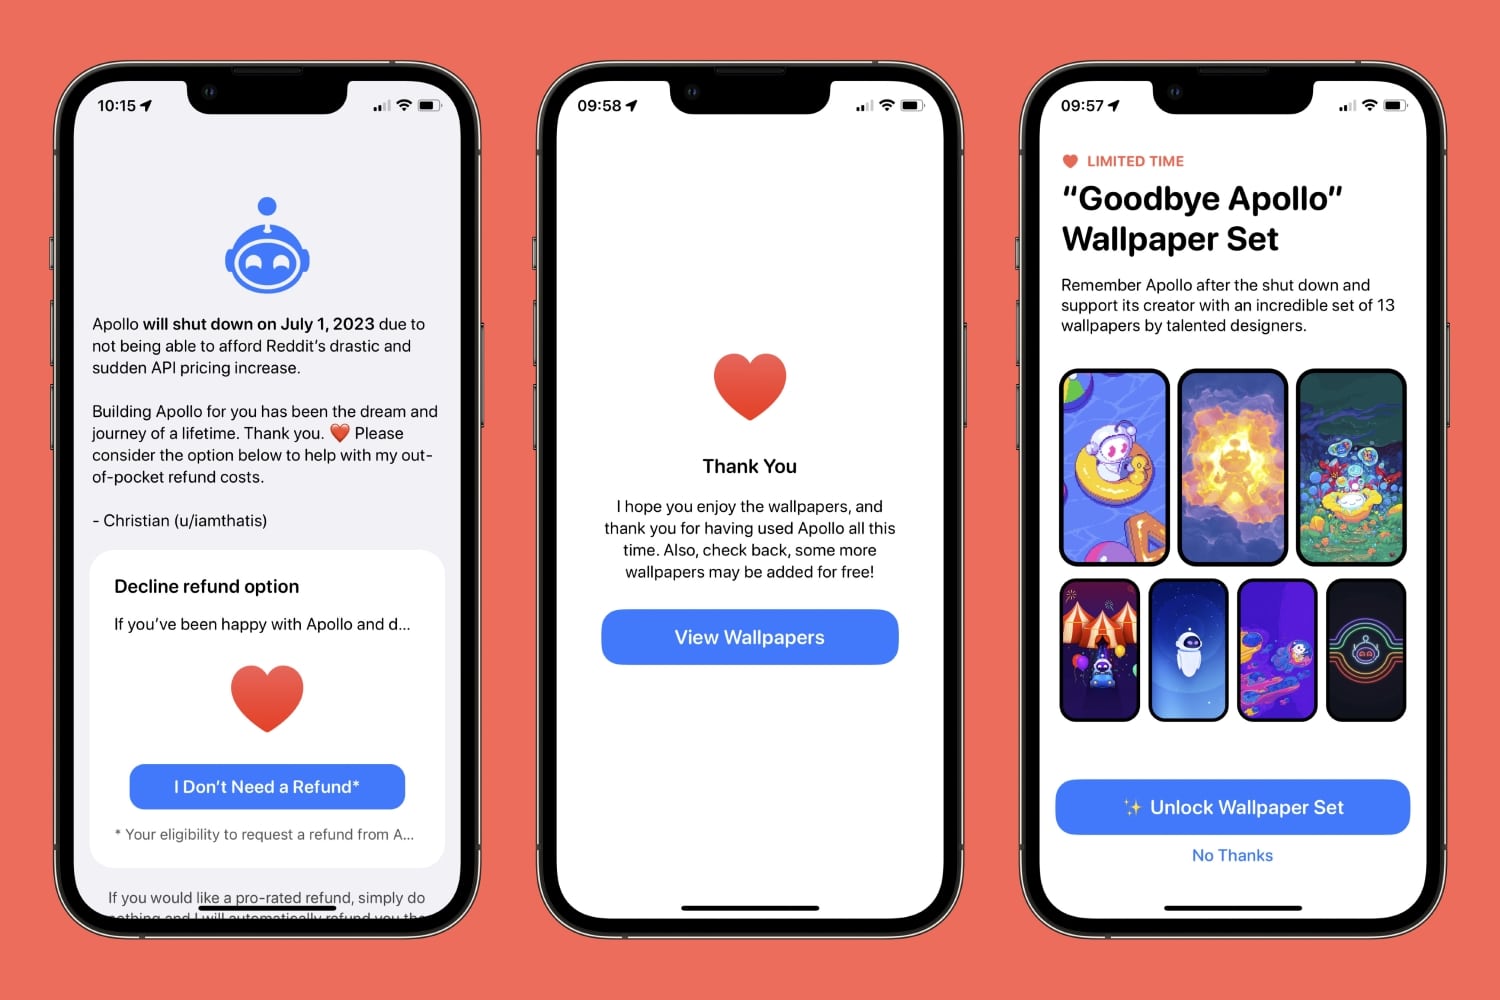 Three iPhones side-by-side show the Apollo app for Reddit. On-screen are messages allowing users to decline a refund for their subscription, a thank you message, and a set of special wallpapers.